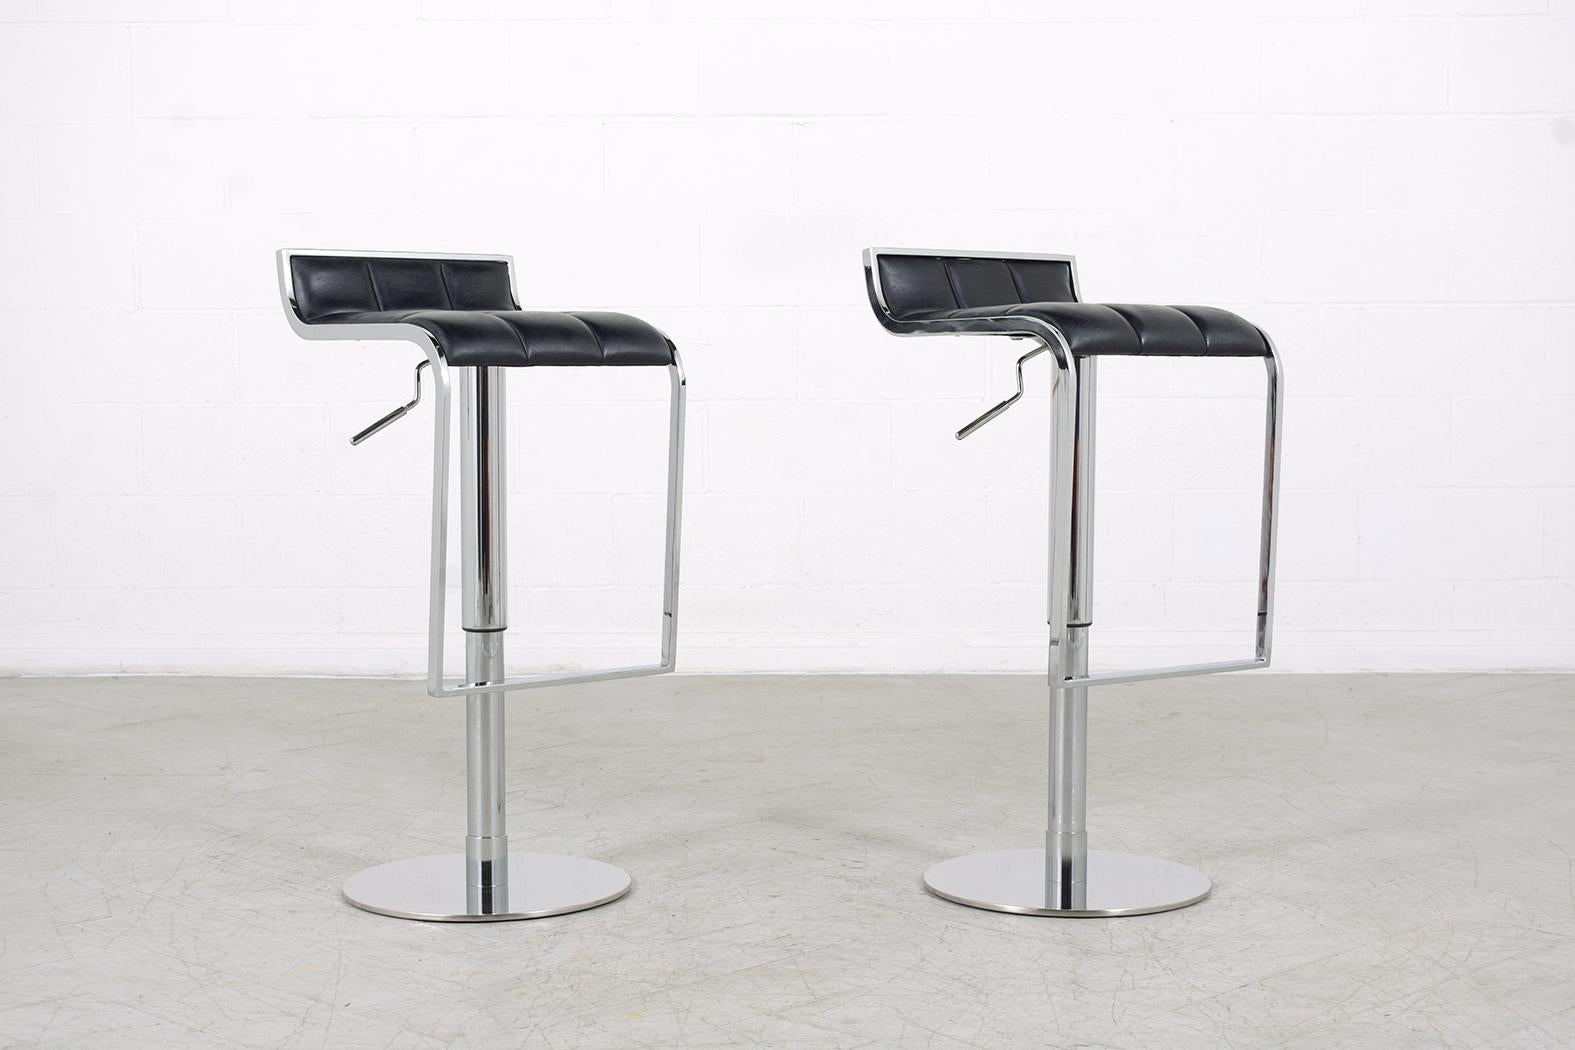 Late 20th Century Vintage Mid-Century Modern Chrome Barstools with Black Leather Seats For Sale